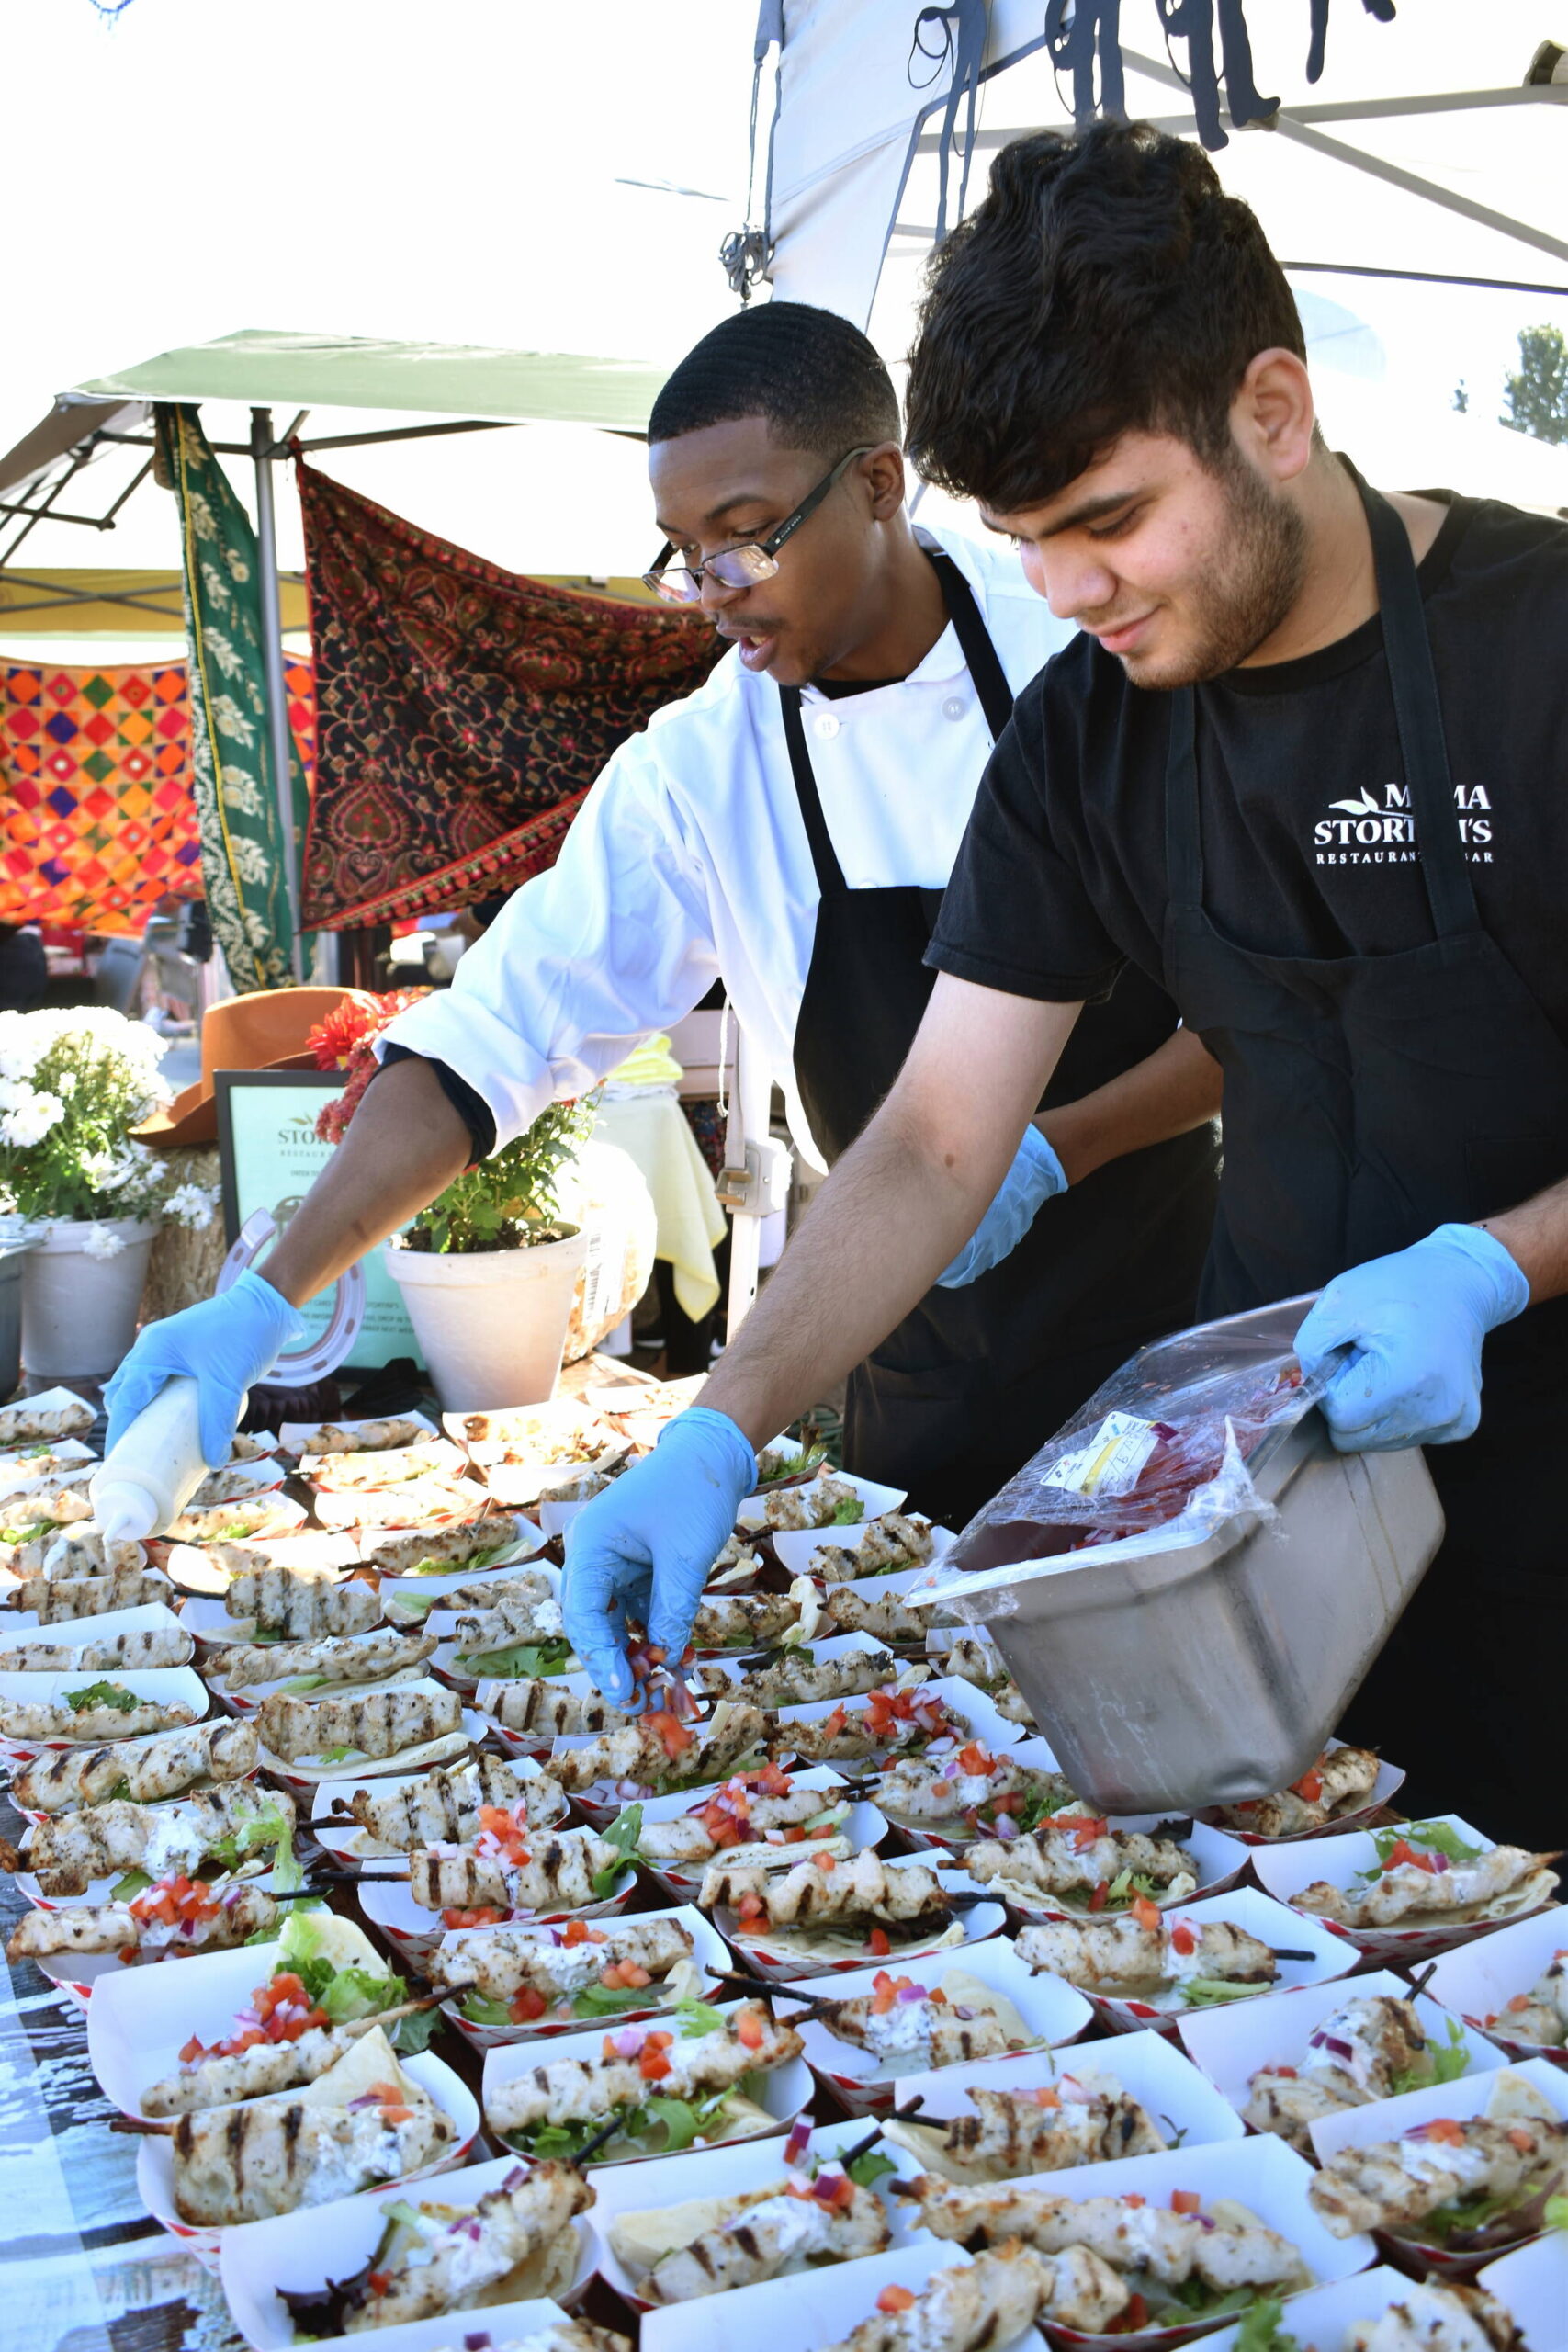 Hassan Obabunmi, left, and Masih Rahmani prepare marinated chicken skewers for Mama Stortini’s entry at the Taste of Federal Way in 2022. File photo.